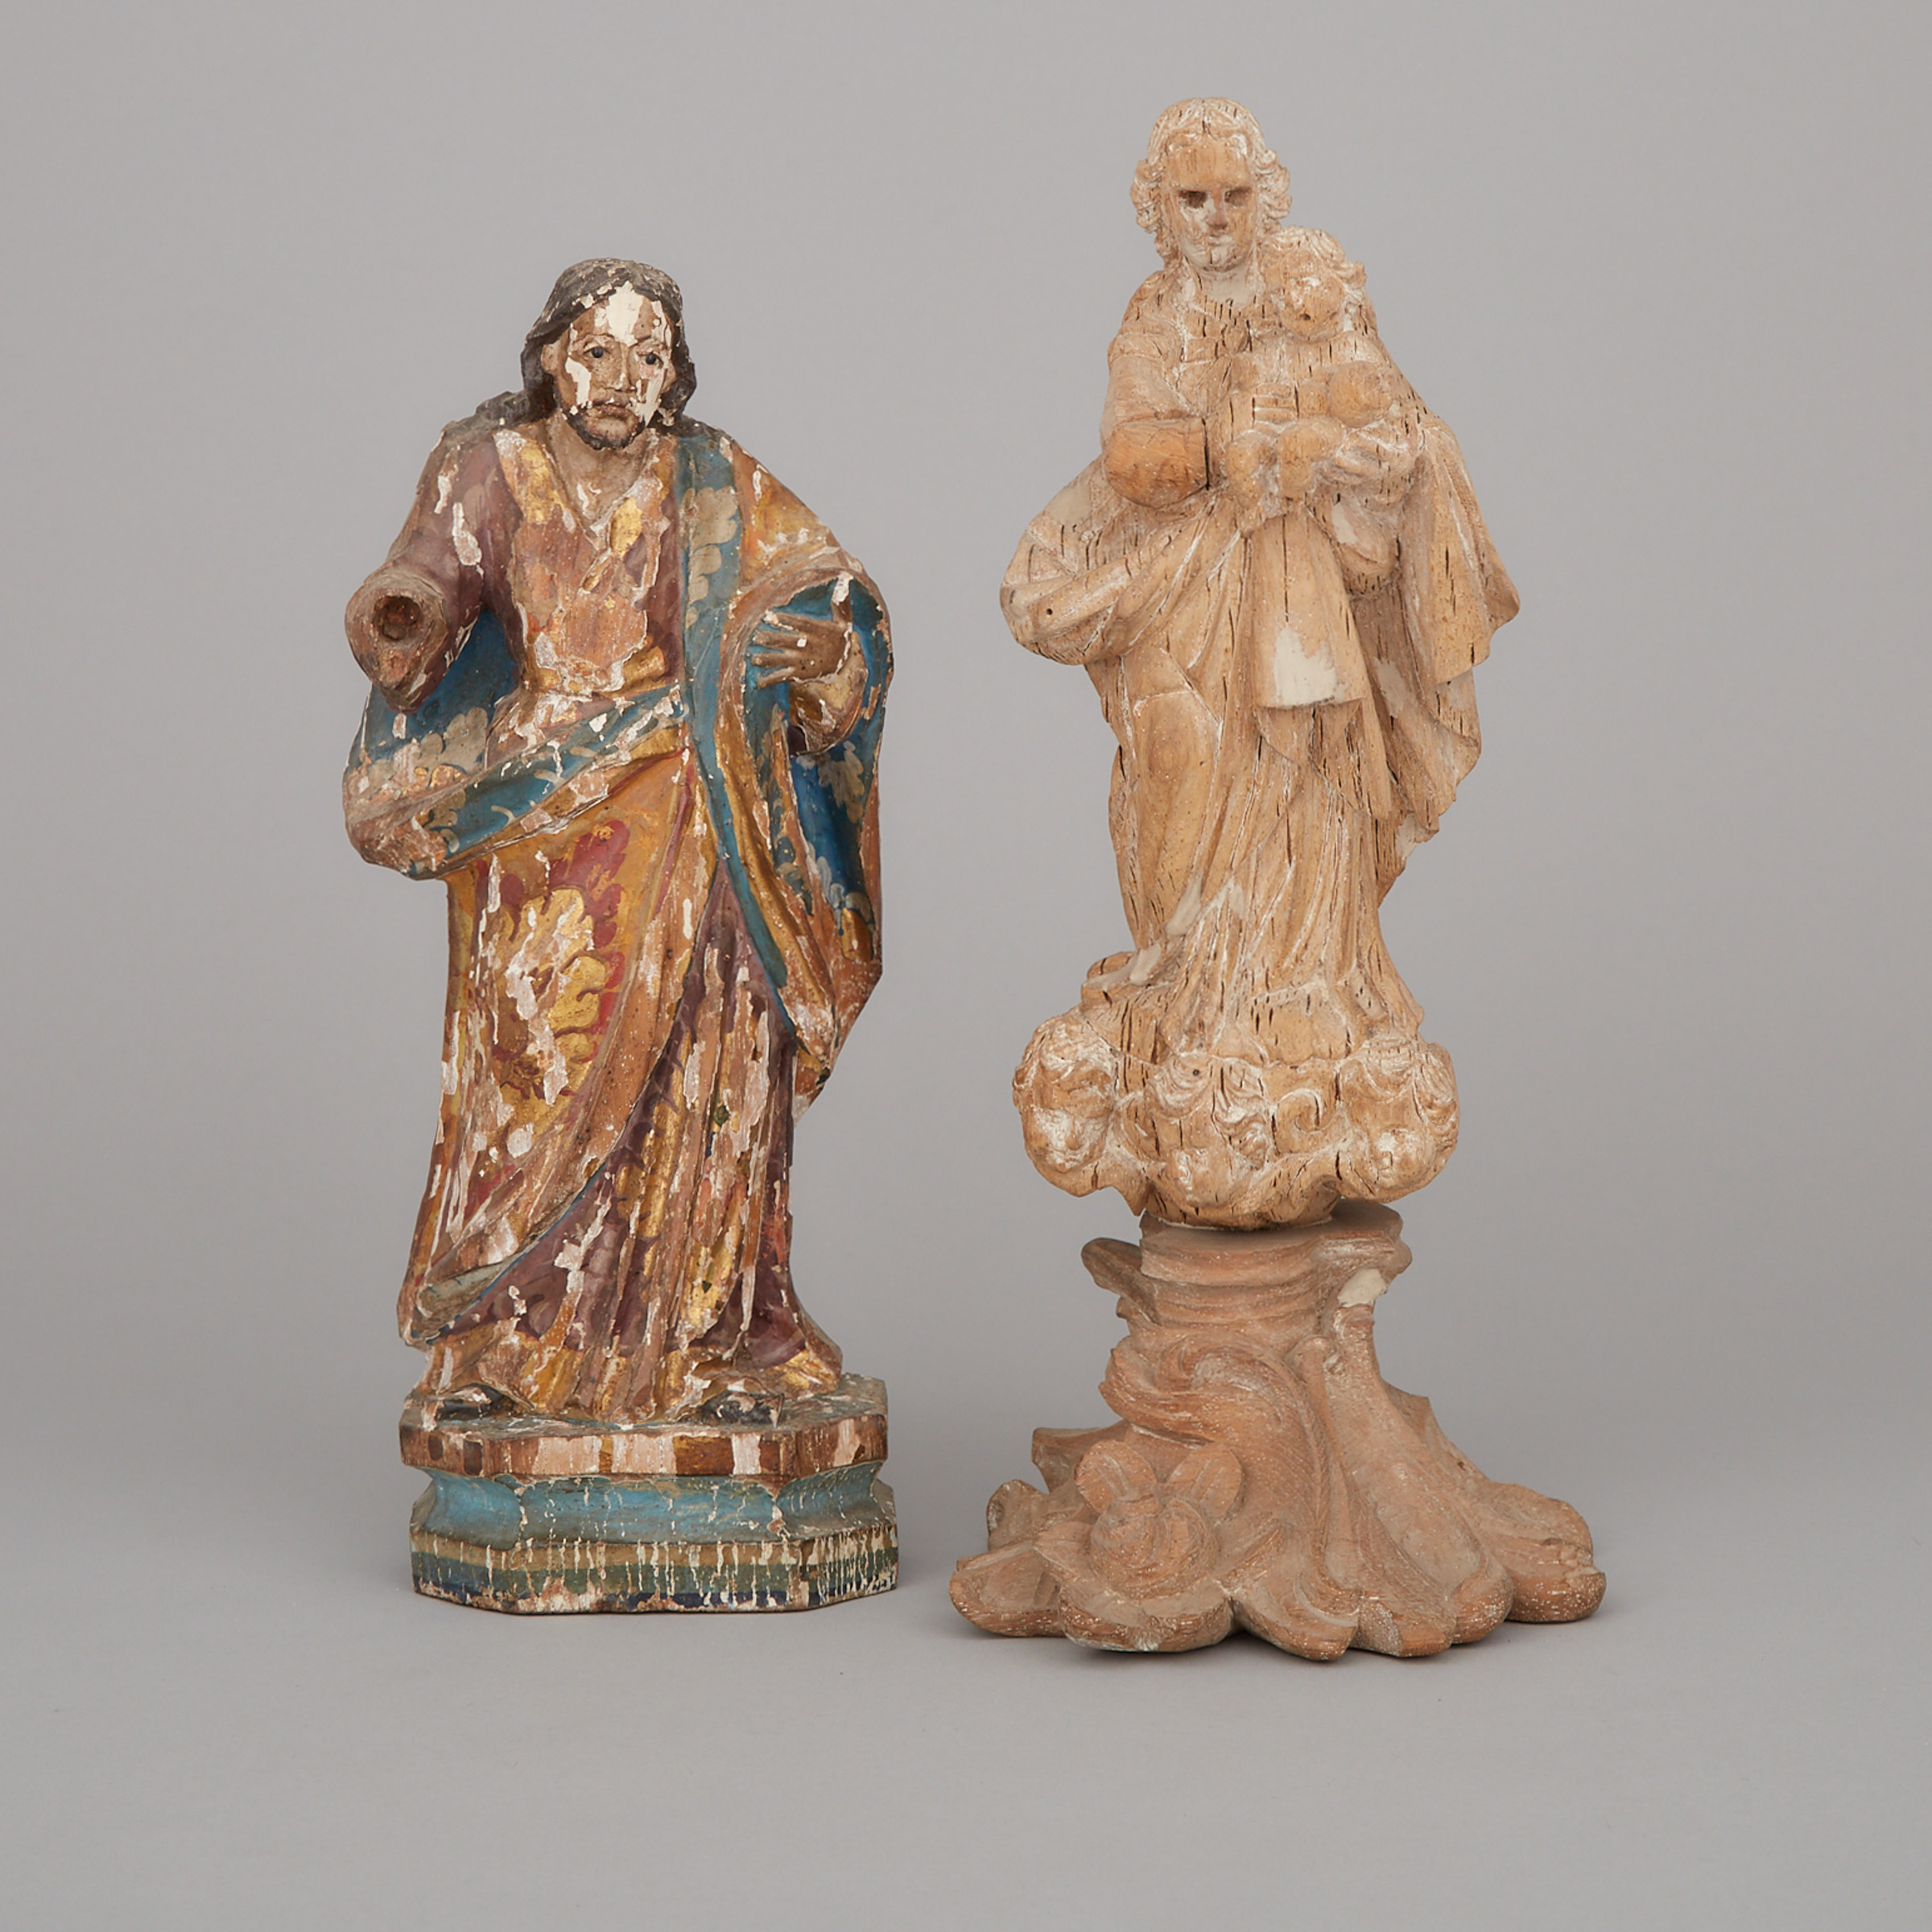 Two Spanish Colonial Santos Figures, 18th/19th century